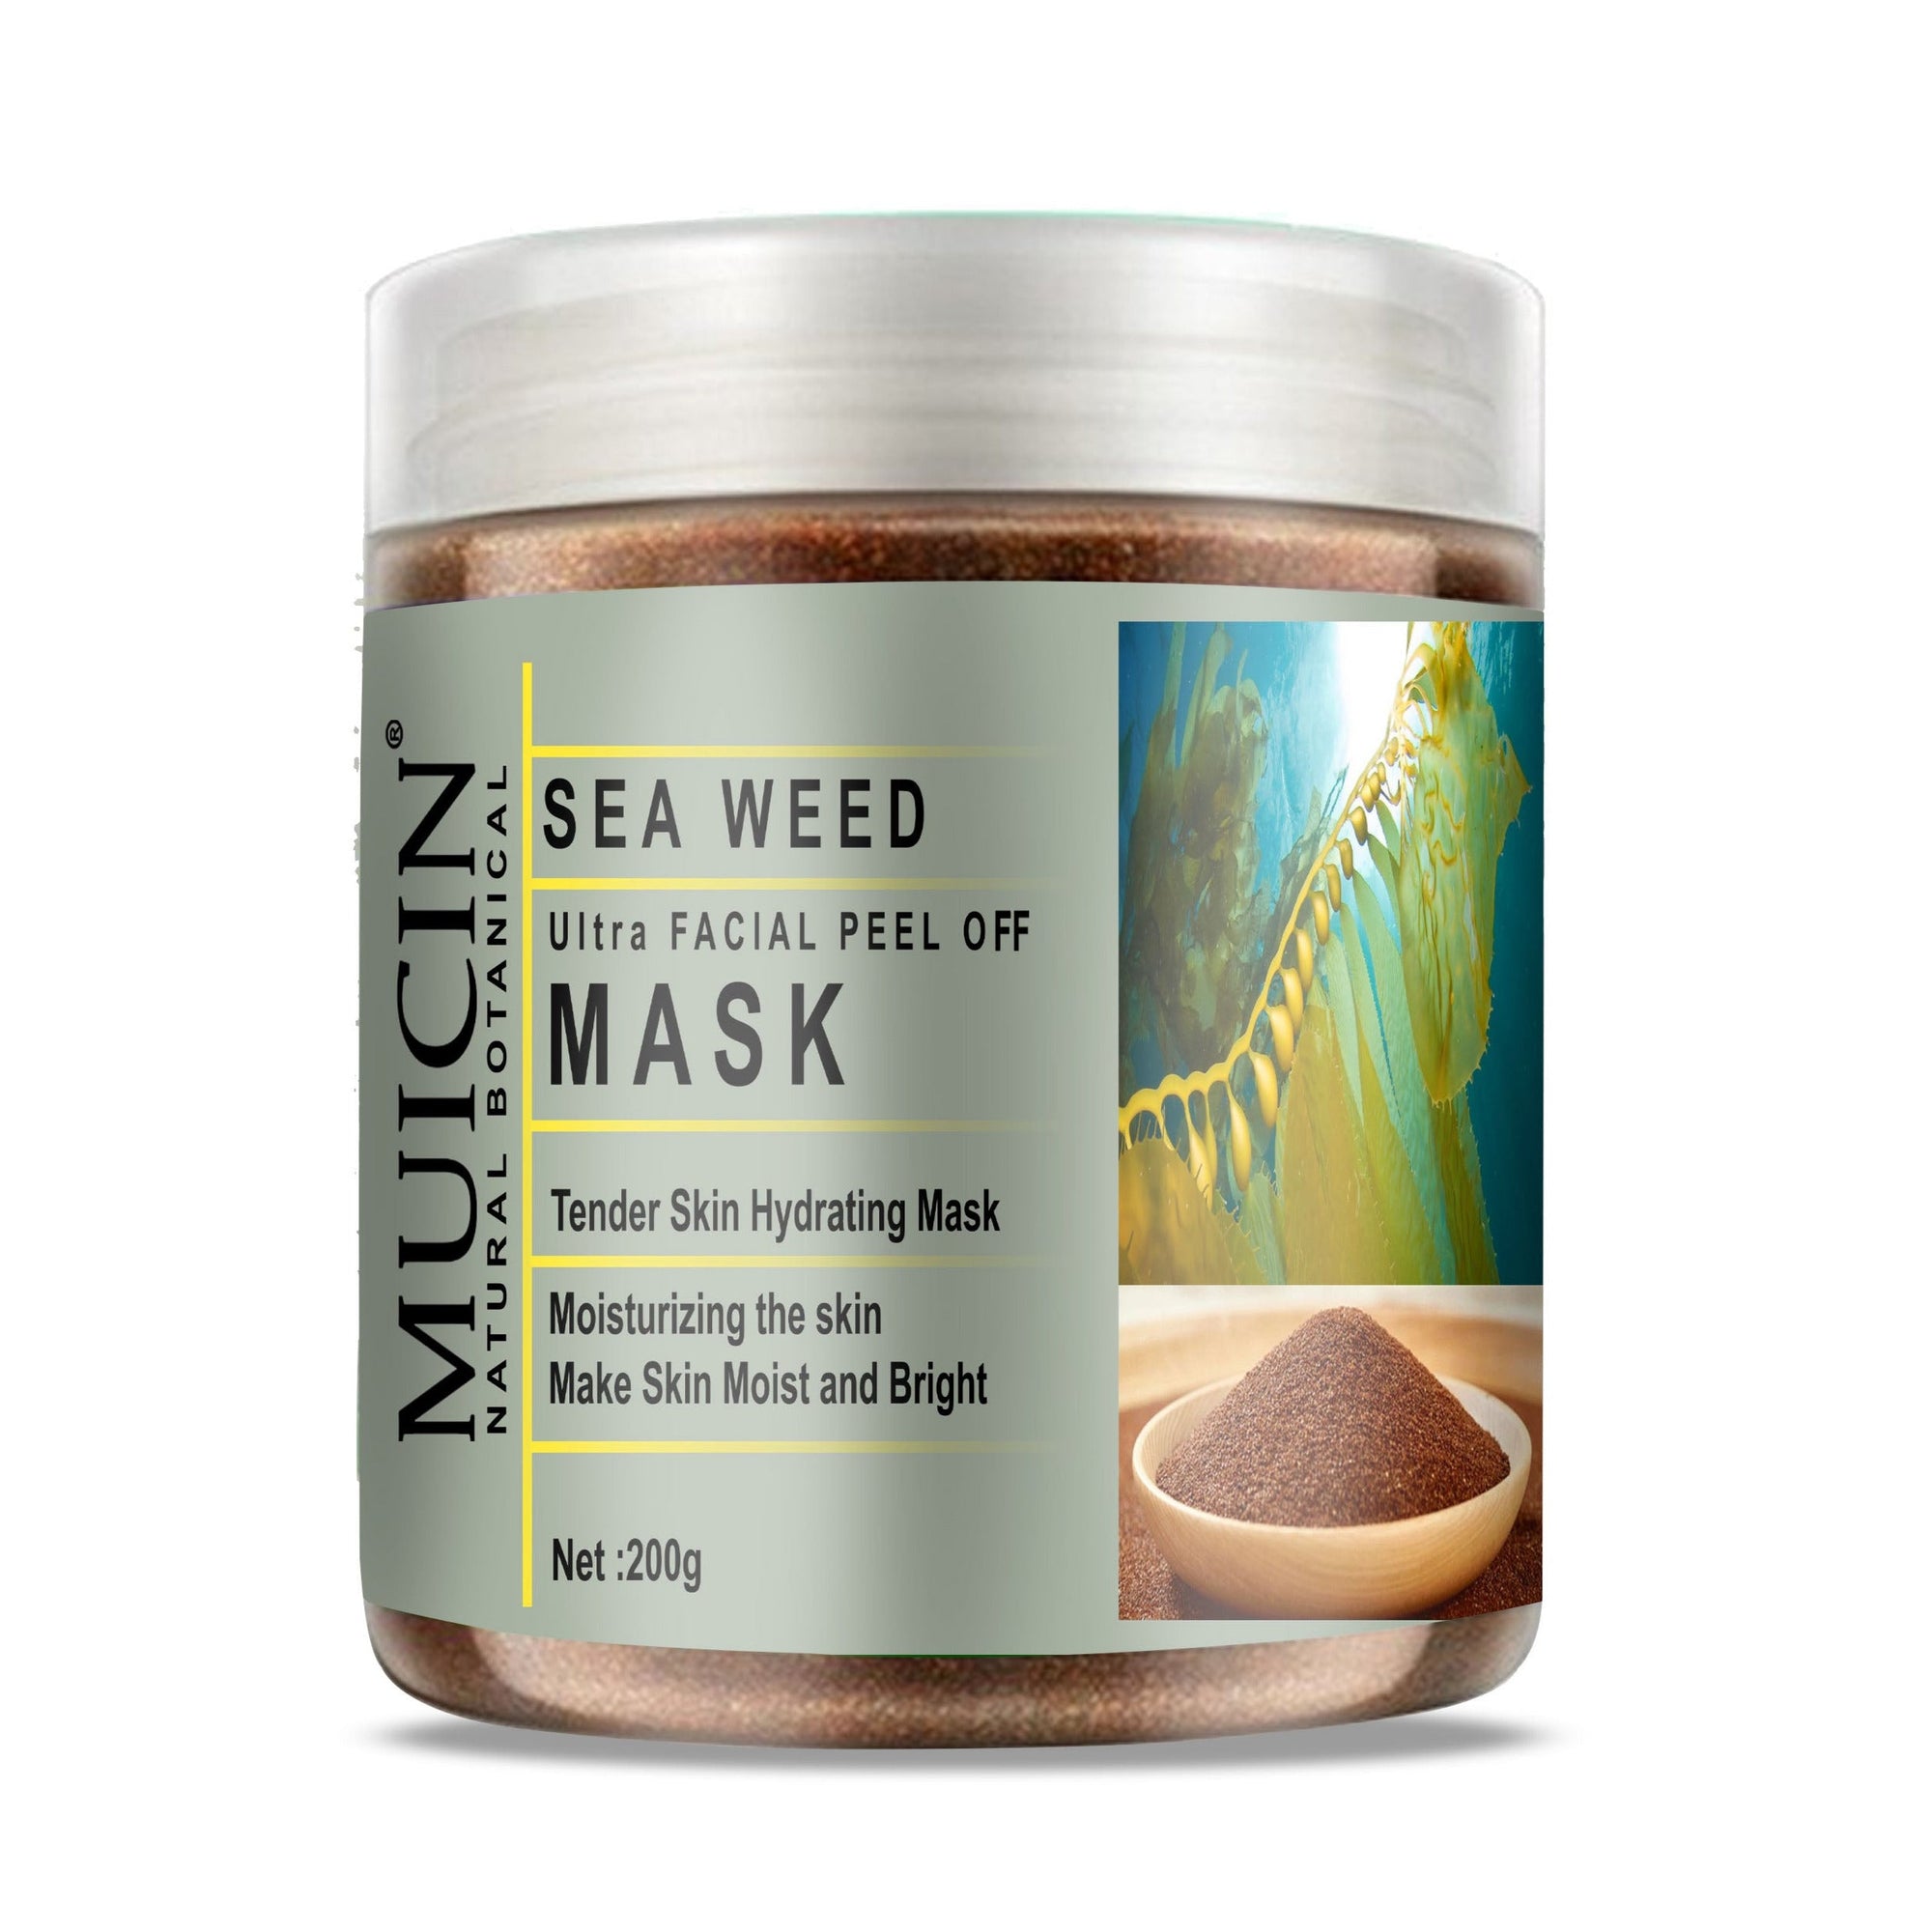 Buy  MUICIN - Sea Weed Ultra Facial Peel-Off Mask - 200g - at Best Price Online in Pakistan